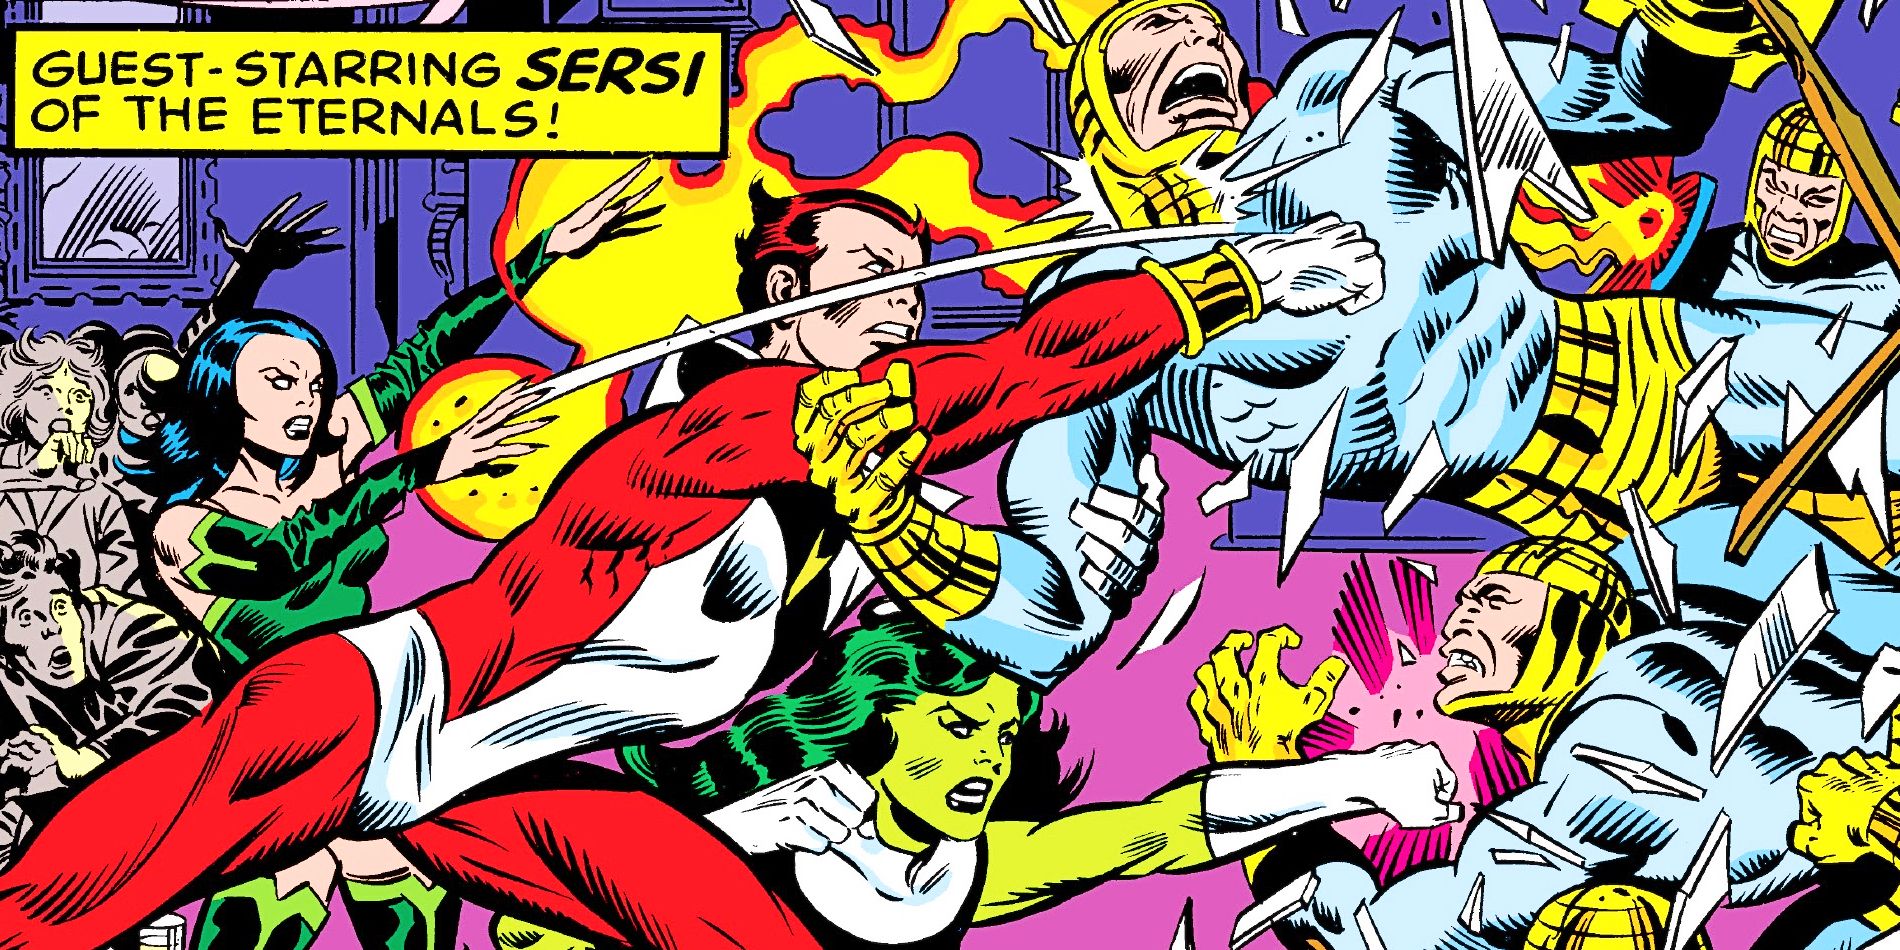 Sersi Meets the Avengers Issue 246